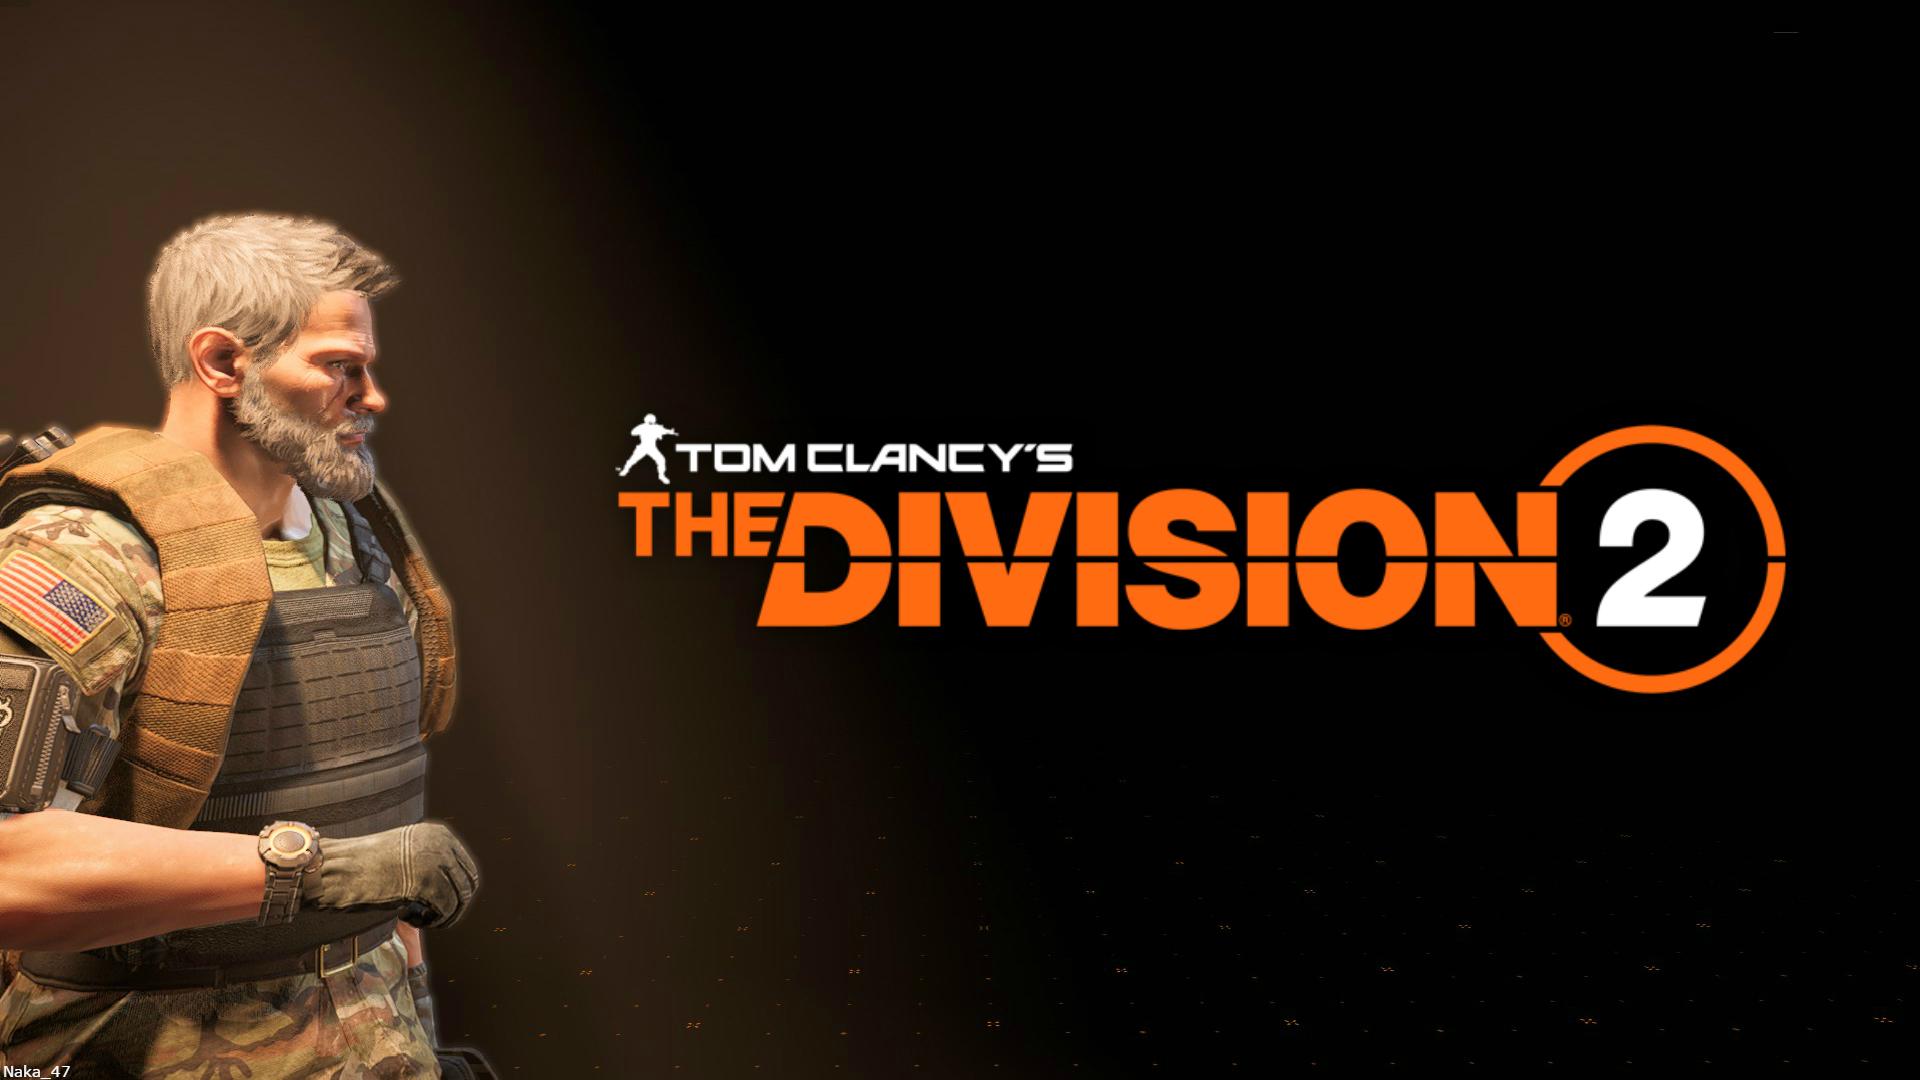 The Division 2 Wallpaper in 4K and Full HD for Desktop